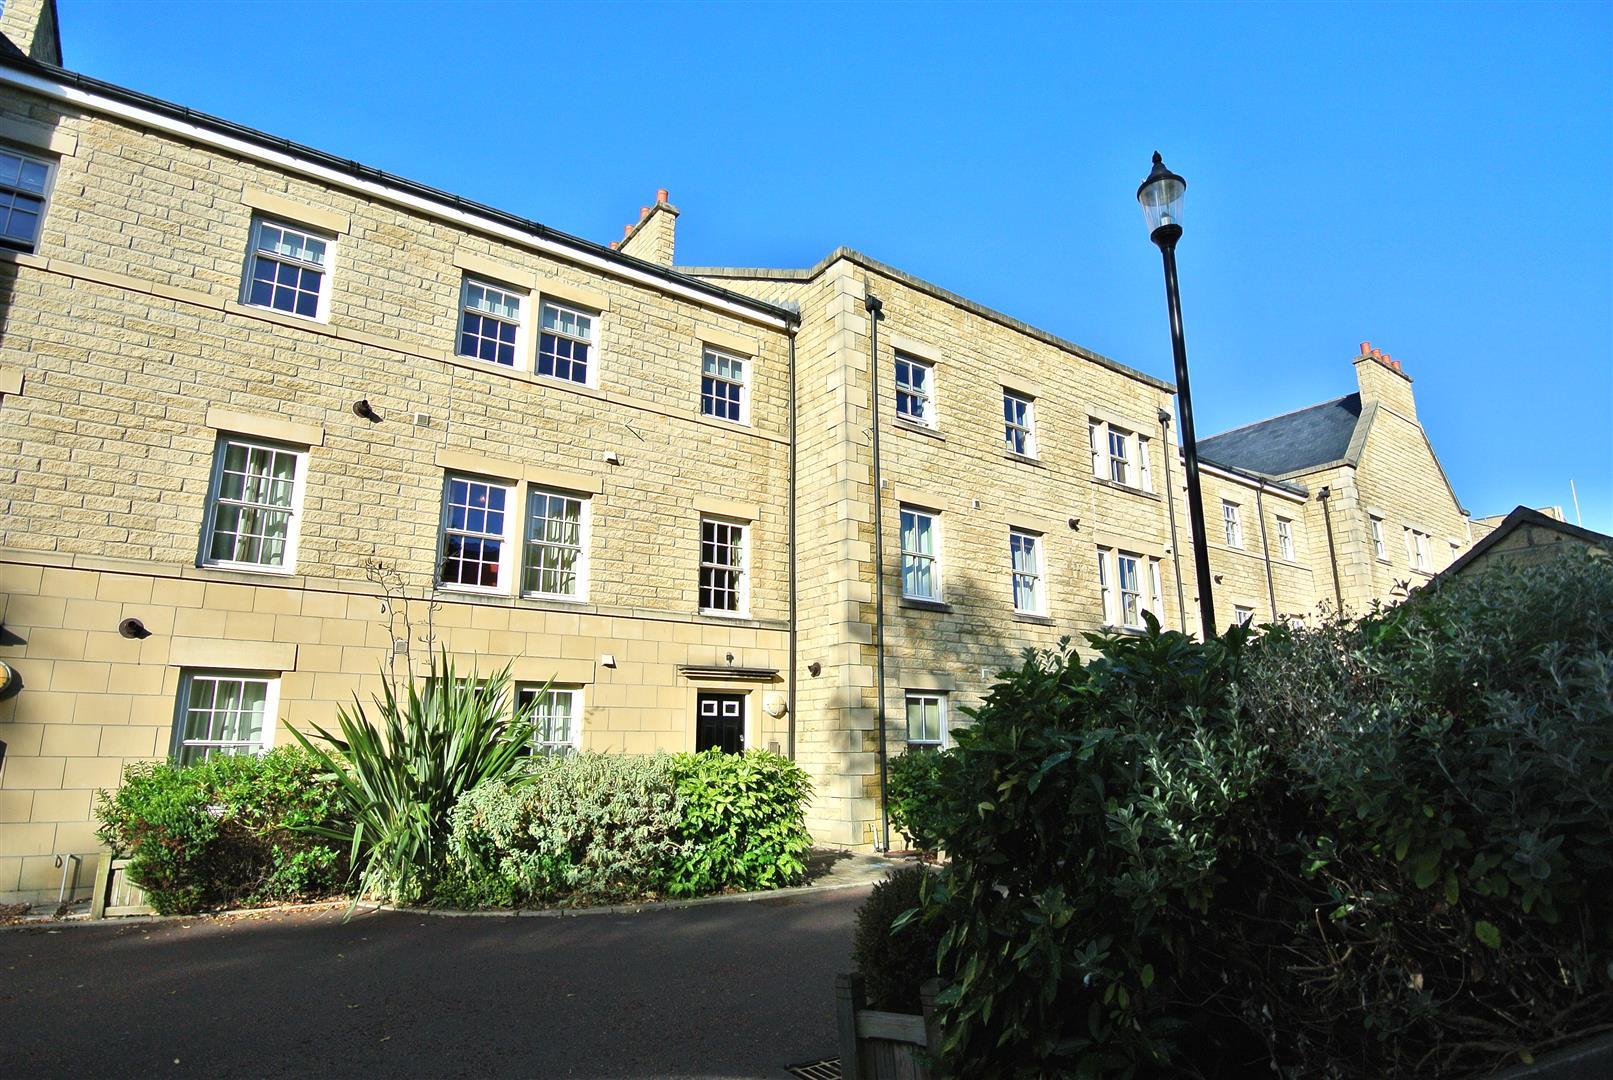 Harrier Court, Lancaster. Expect a monthly rent of £500 cpm